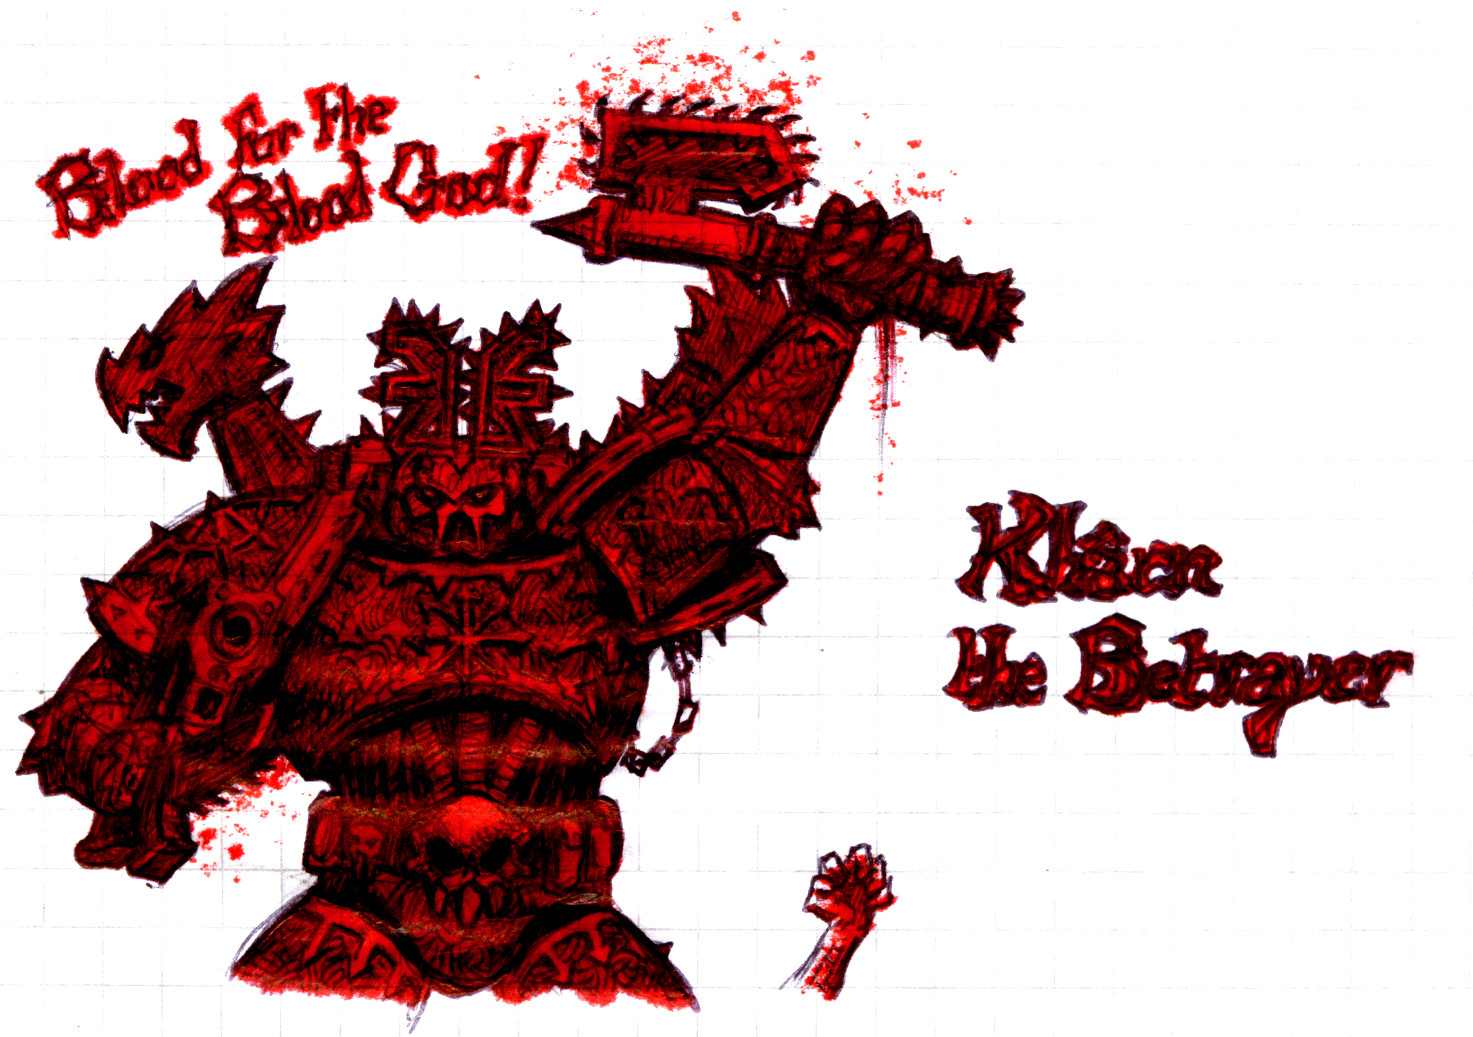 blood_for_the_blood_god_by_armel.jpg